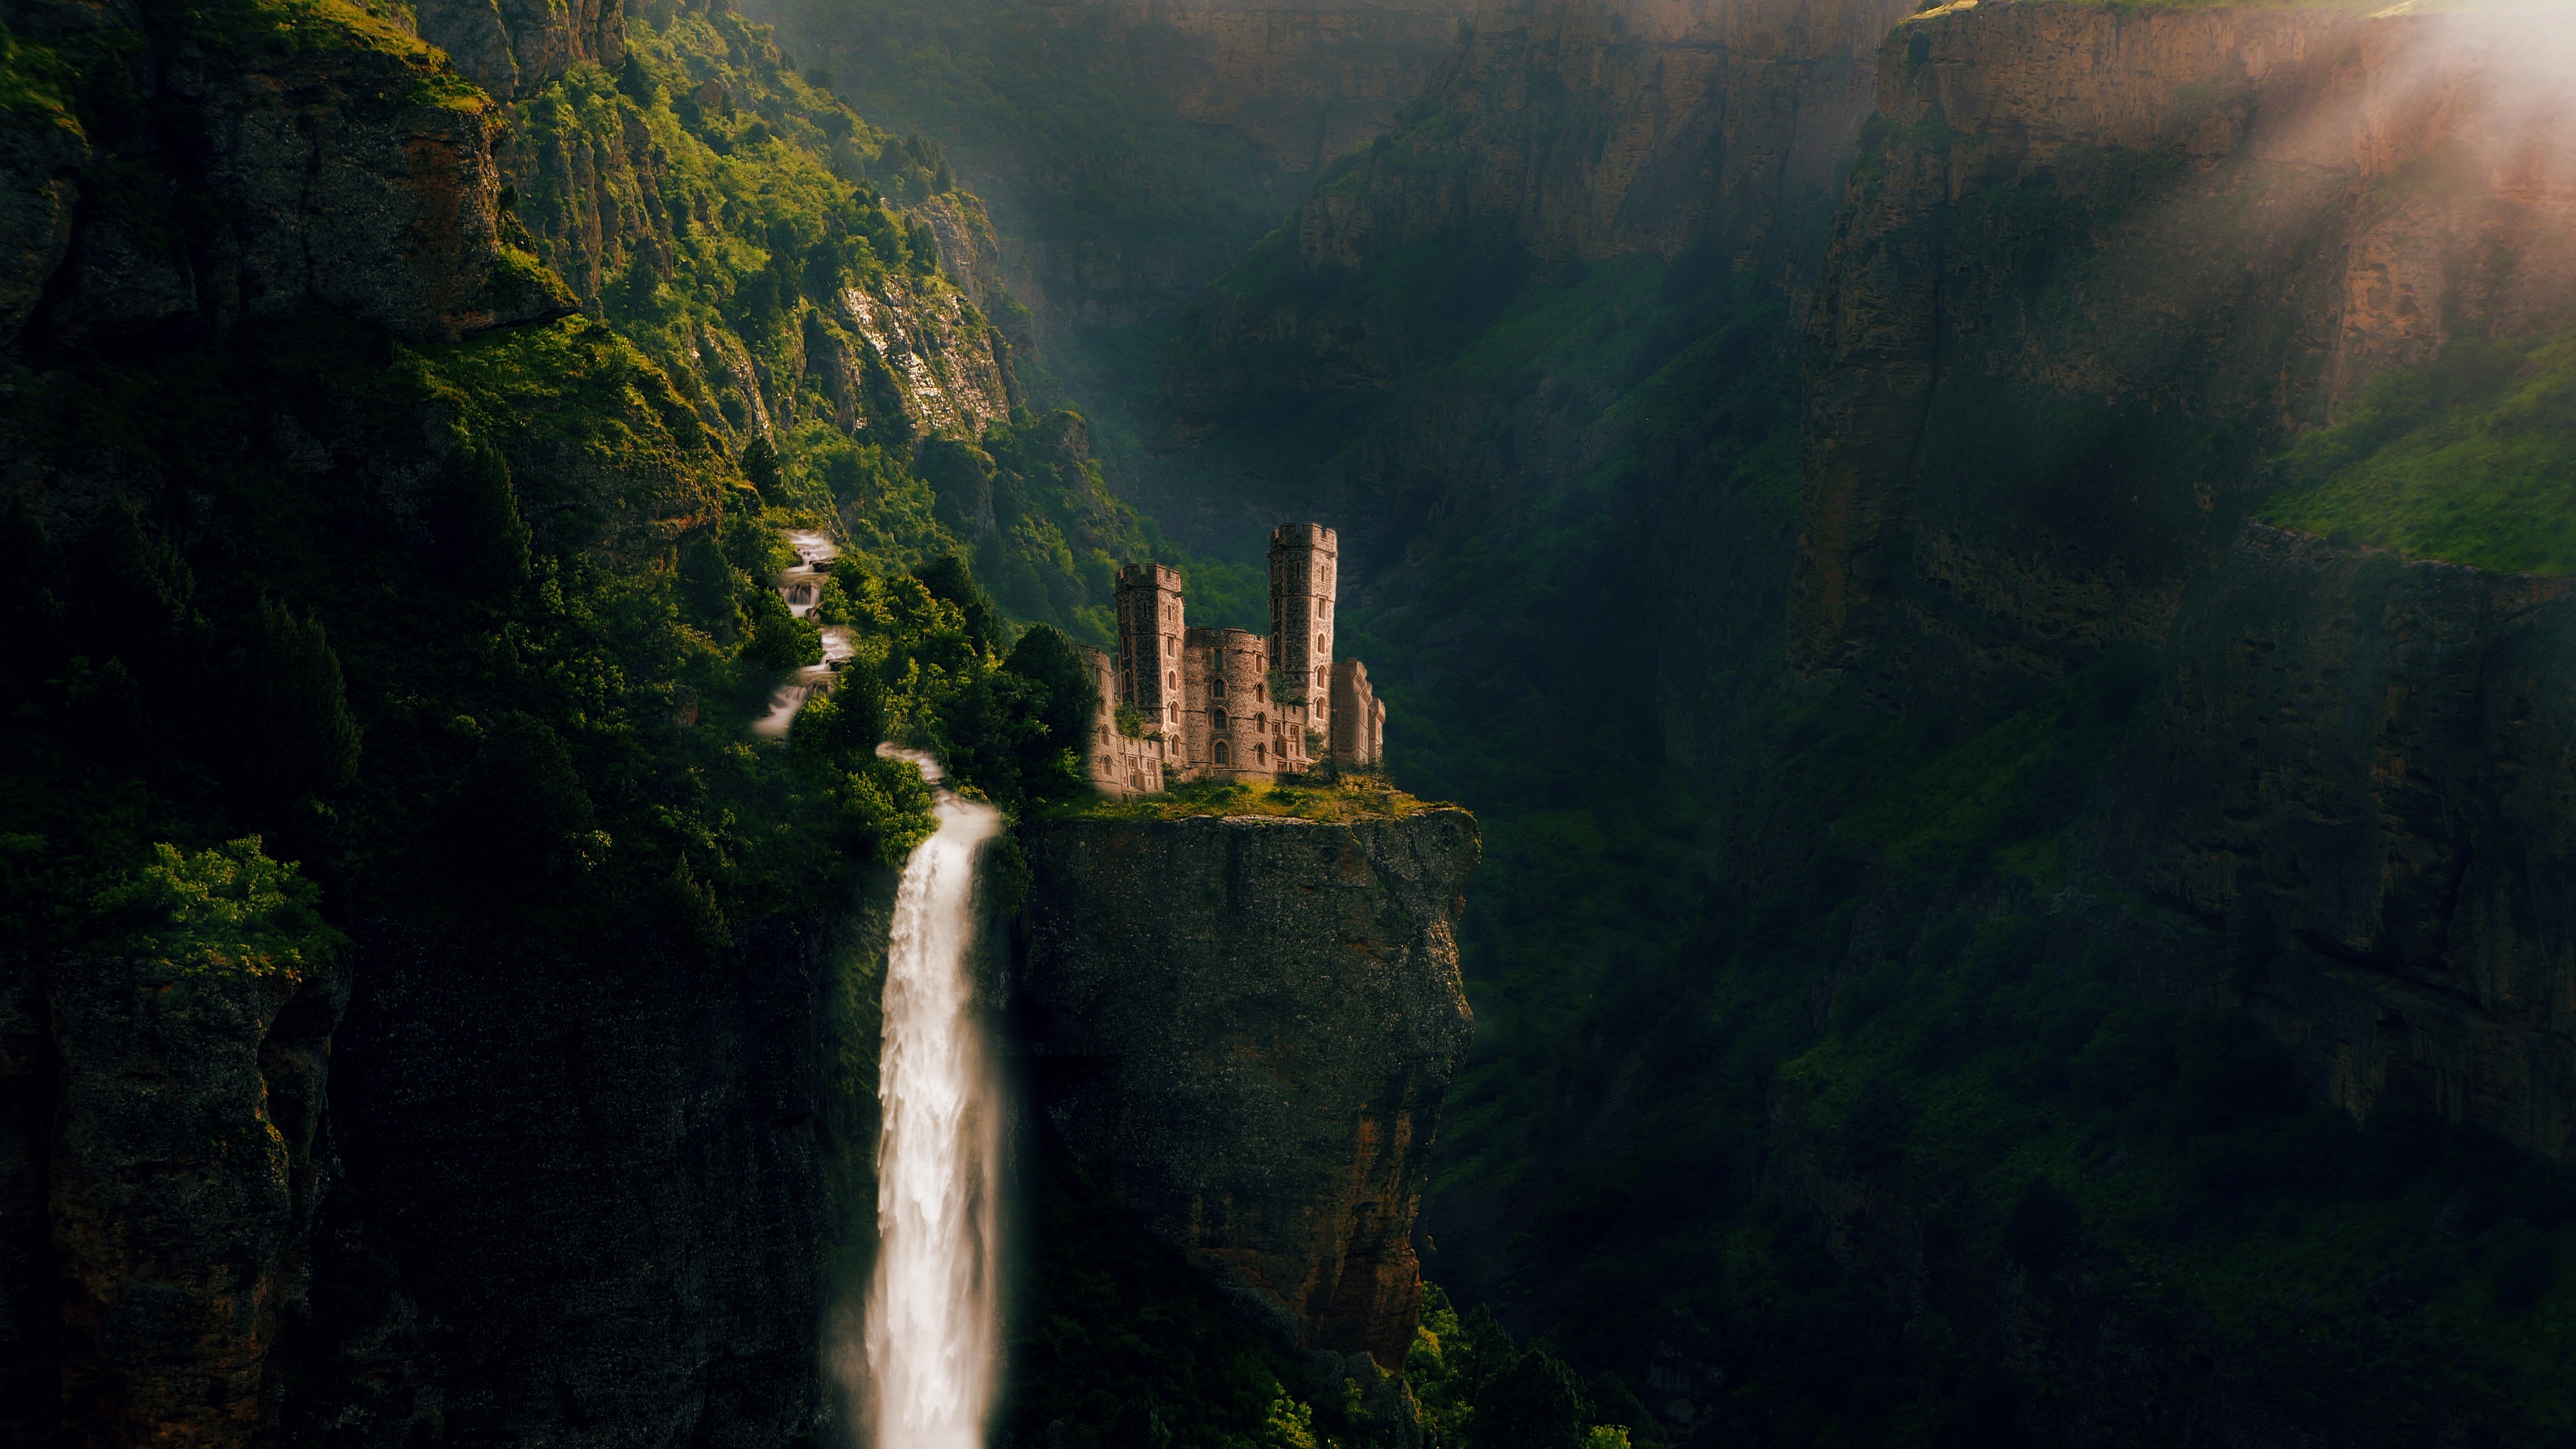 98877 download wallpaper fantasy, lock, rocks, waterfall, photoshop, fairy, fabulous screensavers and pictures for free